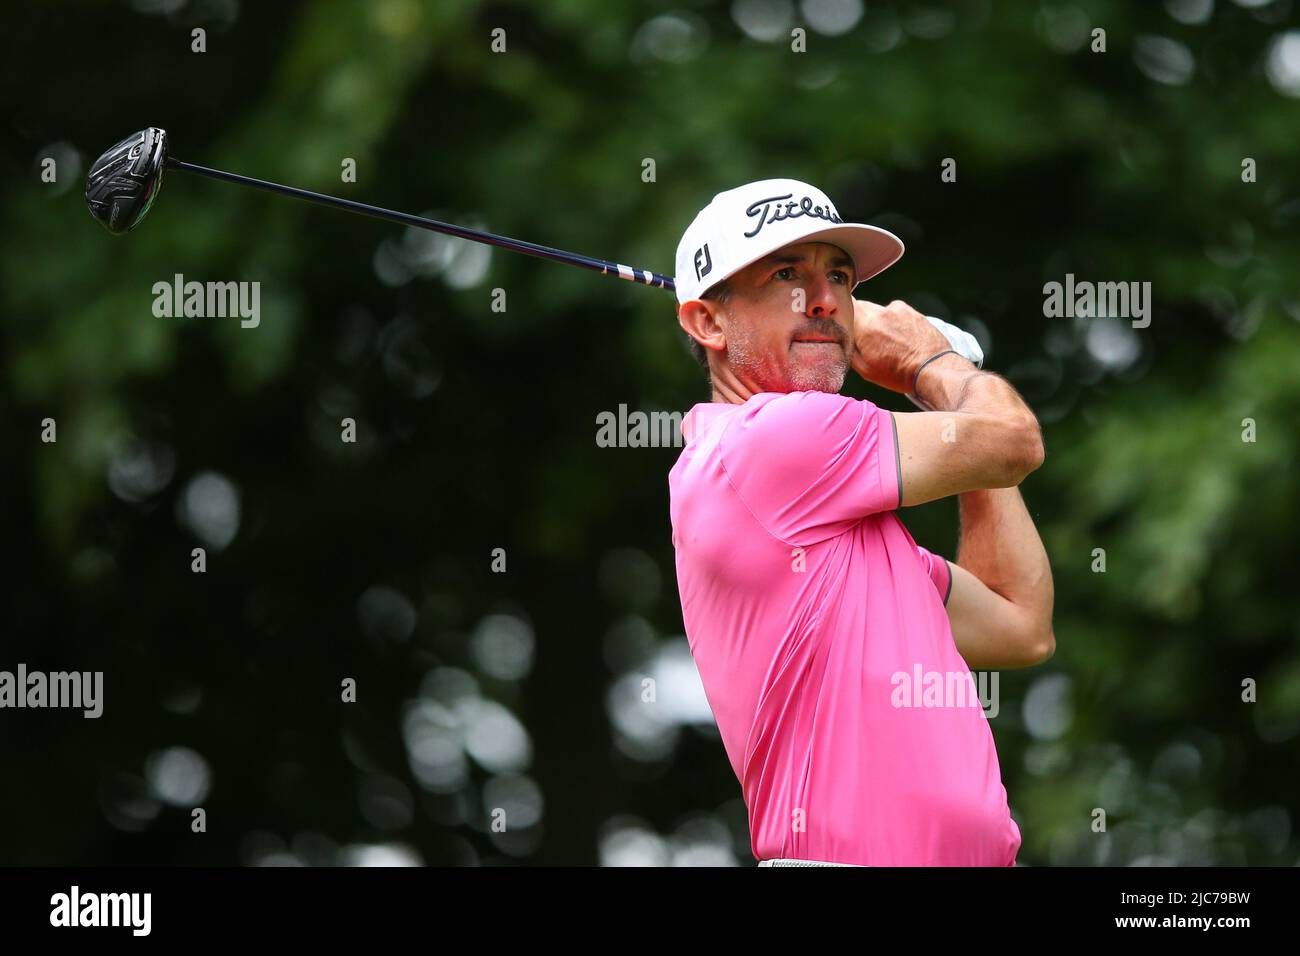 ST ALBANS, ENGLAND - JUNE 09: Wade Ormsby of Australia tees off on the 4th hole during day one of the LIV Golf Invitational at The Centurion Club on June 9, 2022 in St Albans, England. (MB Media) Stock Photo